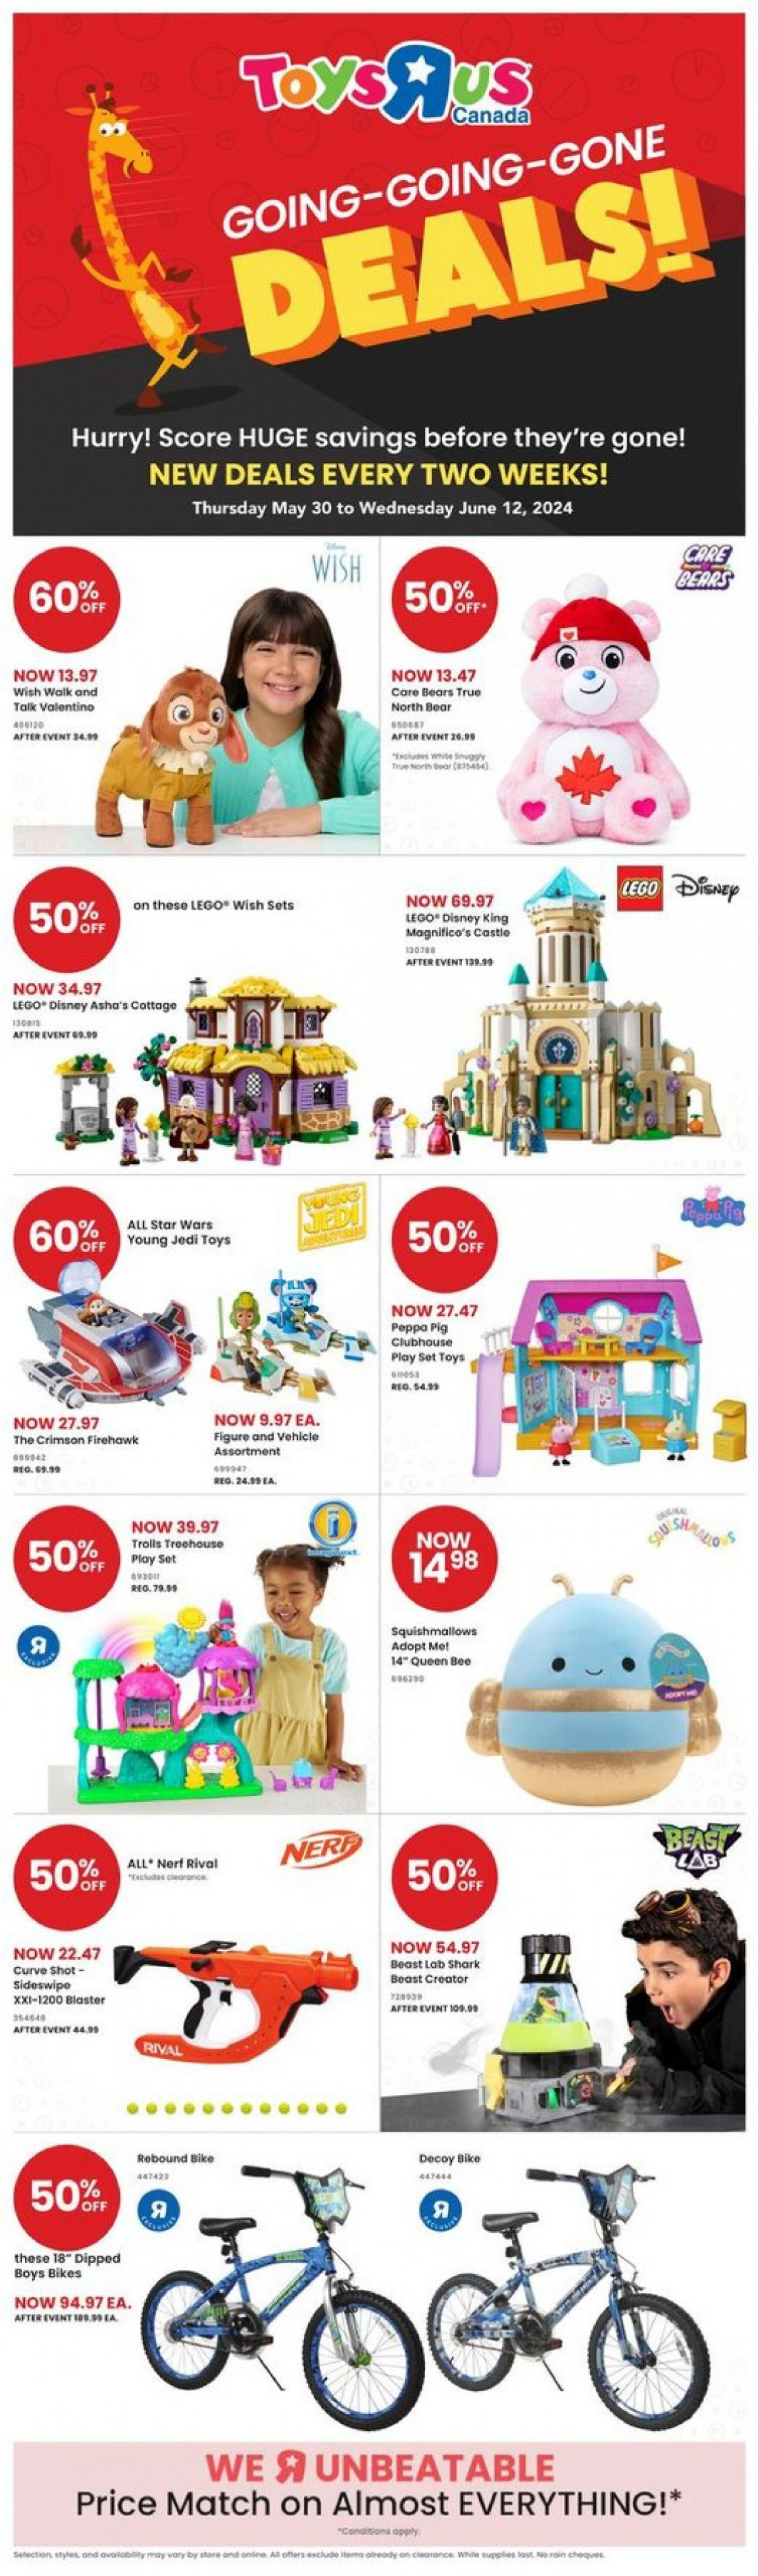 toys-r-us - Toysrus flyer current 30.05. - 12.06. - page: 1